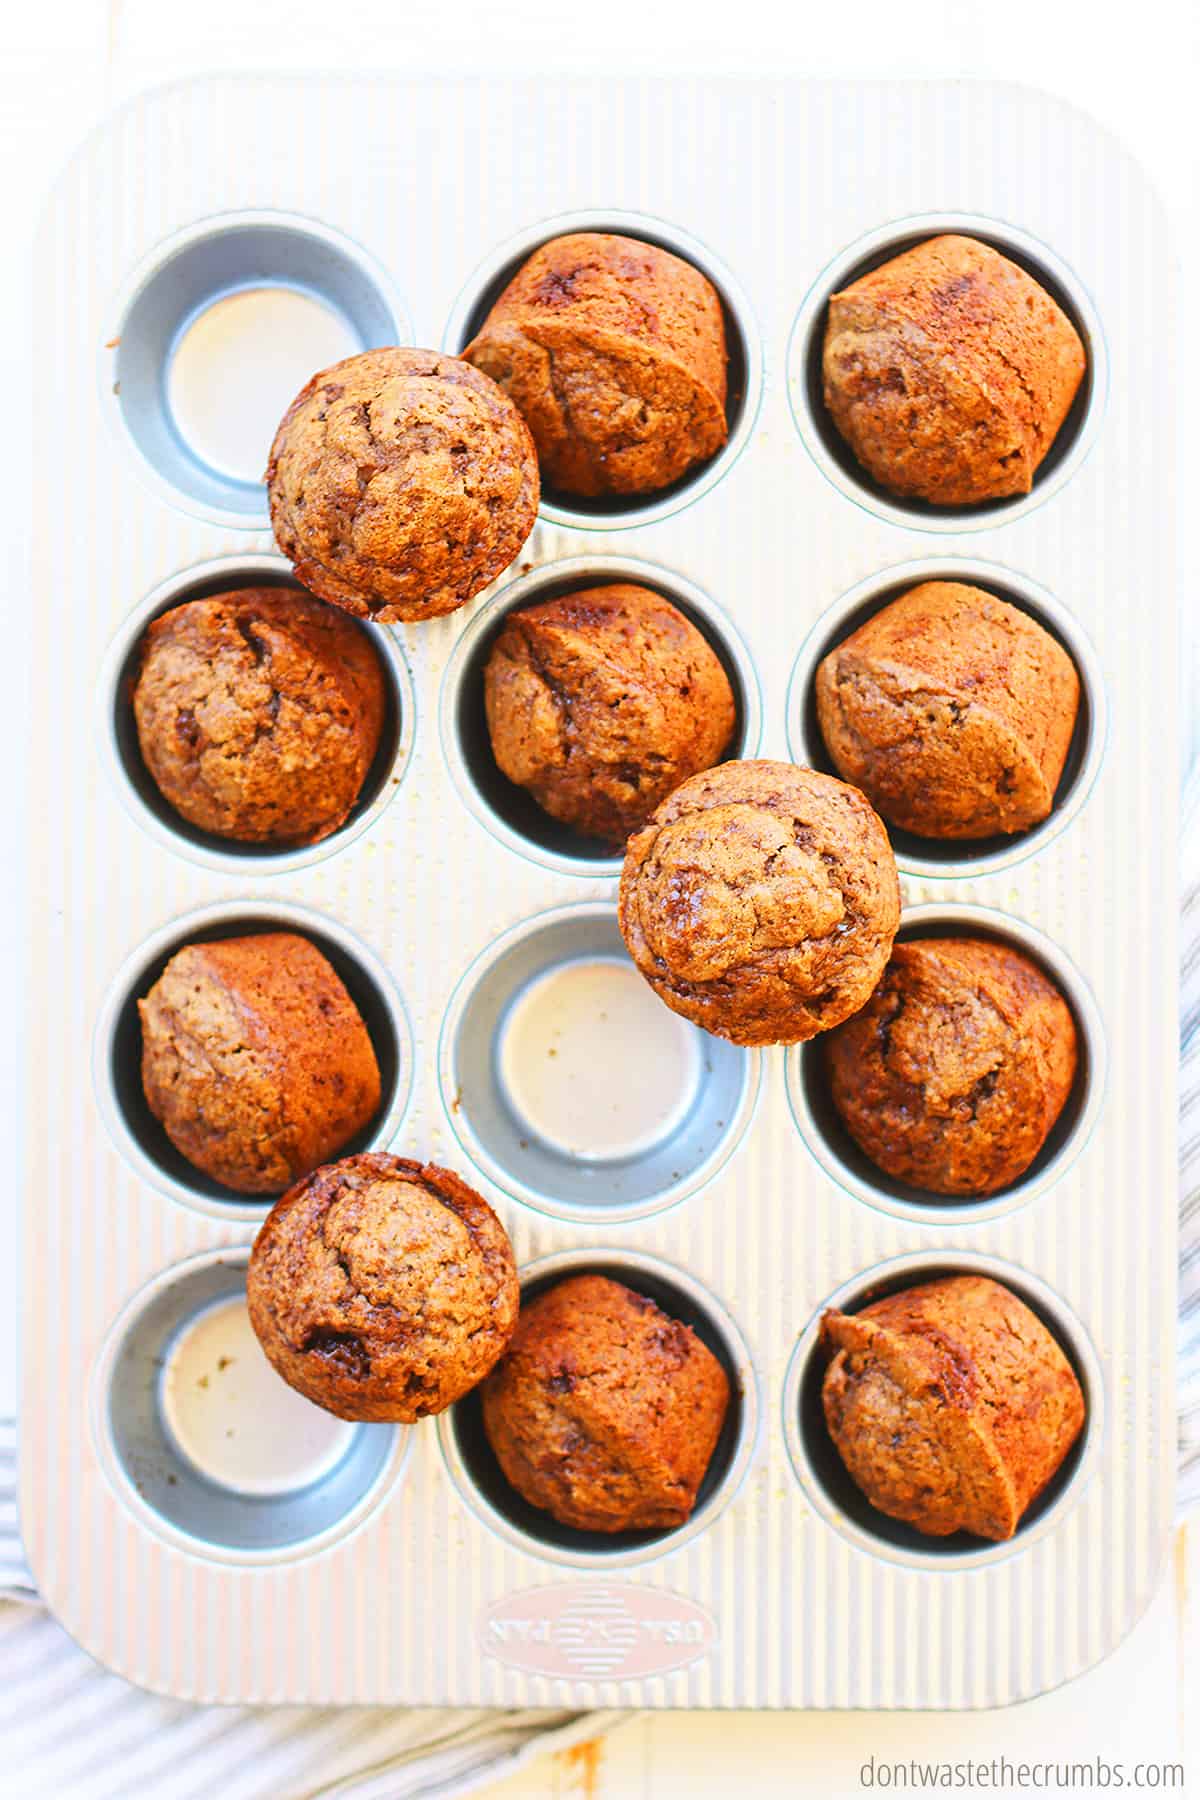 Remove applesauce muffins from muffin tin and store in an air-tight container or freeze in plastic freezer bags for up to 3 months.